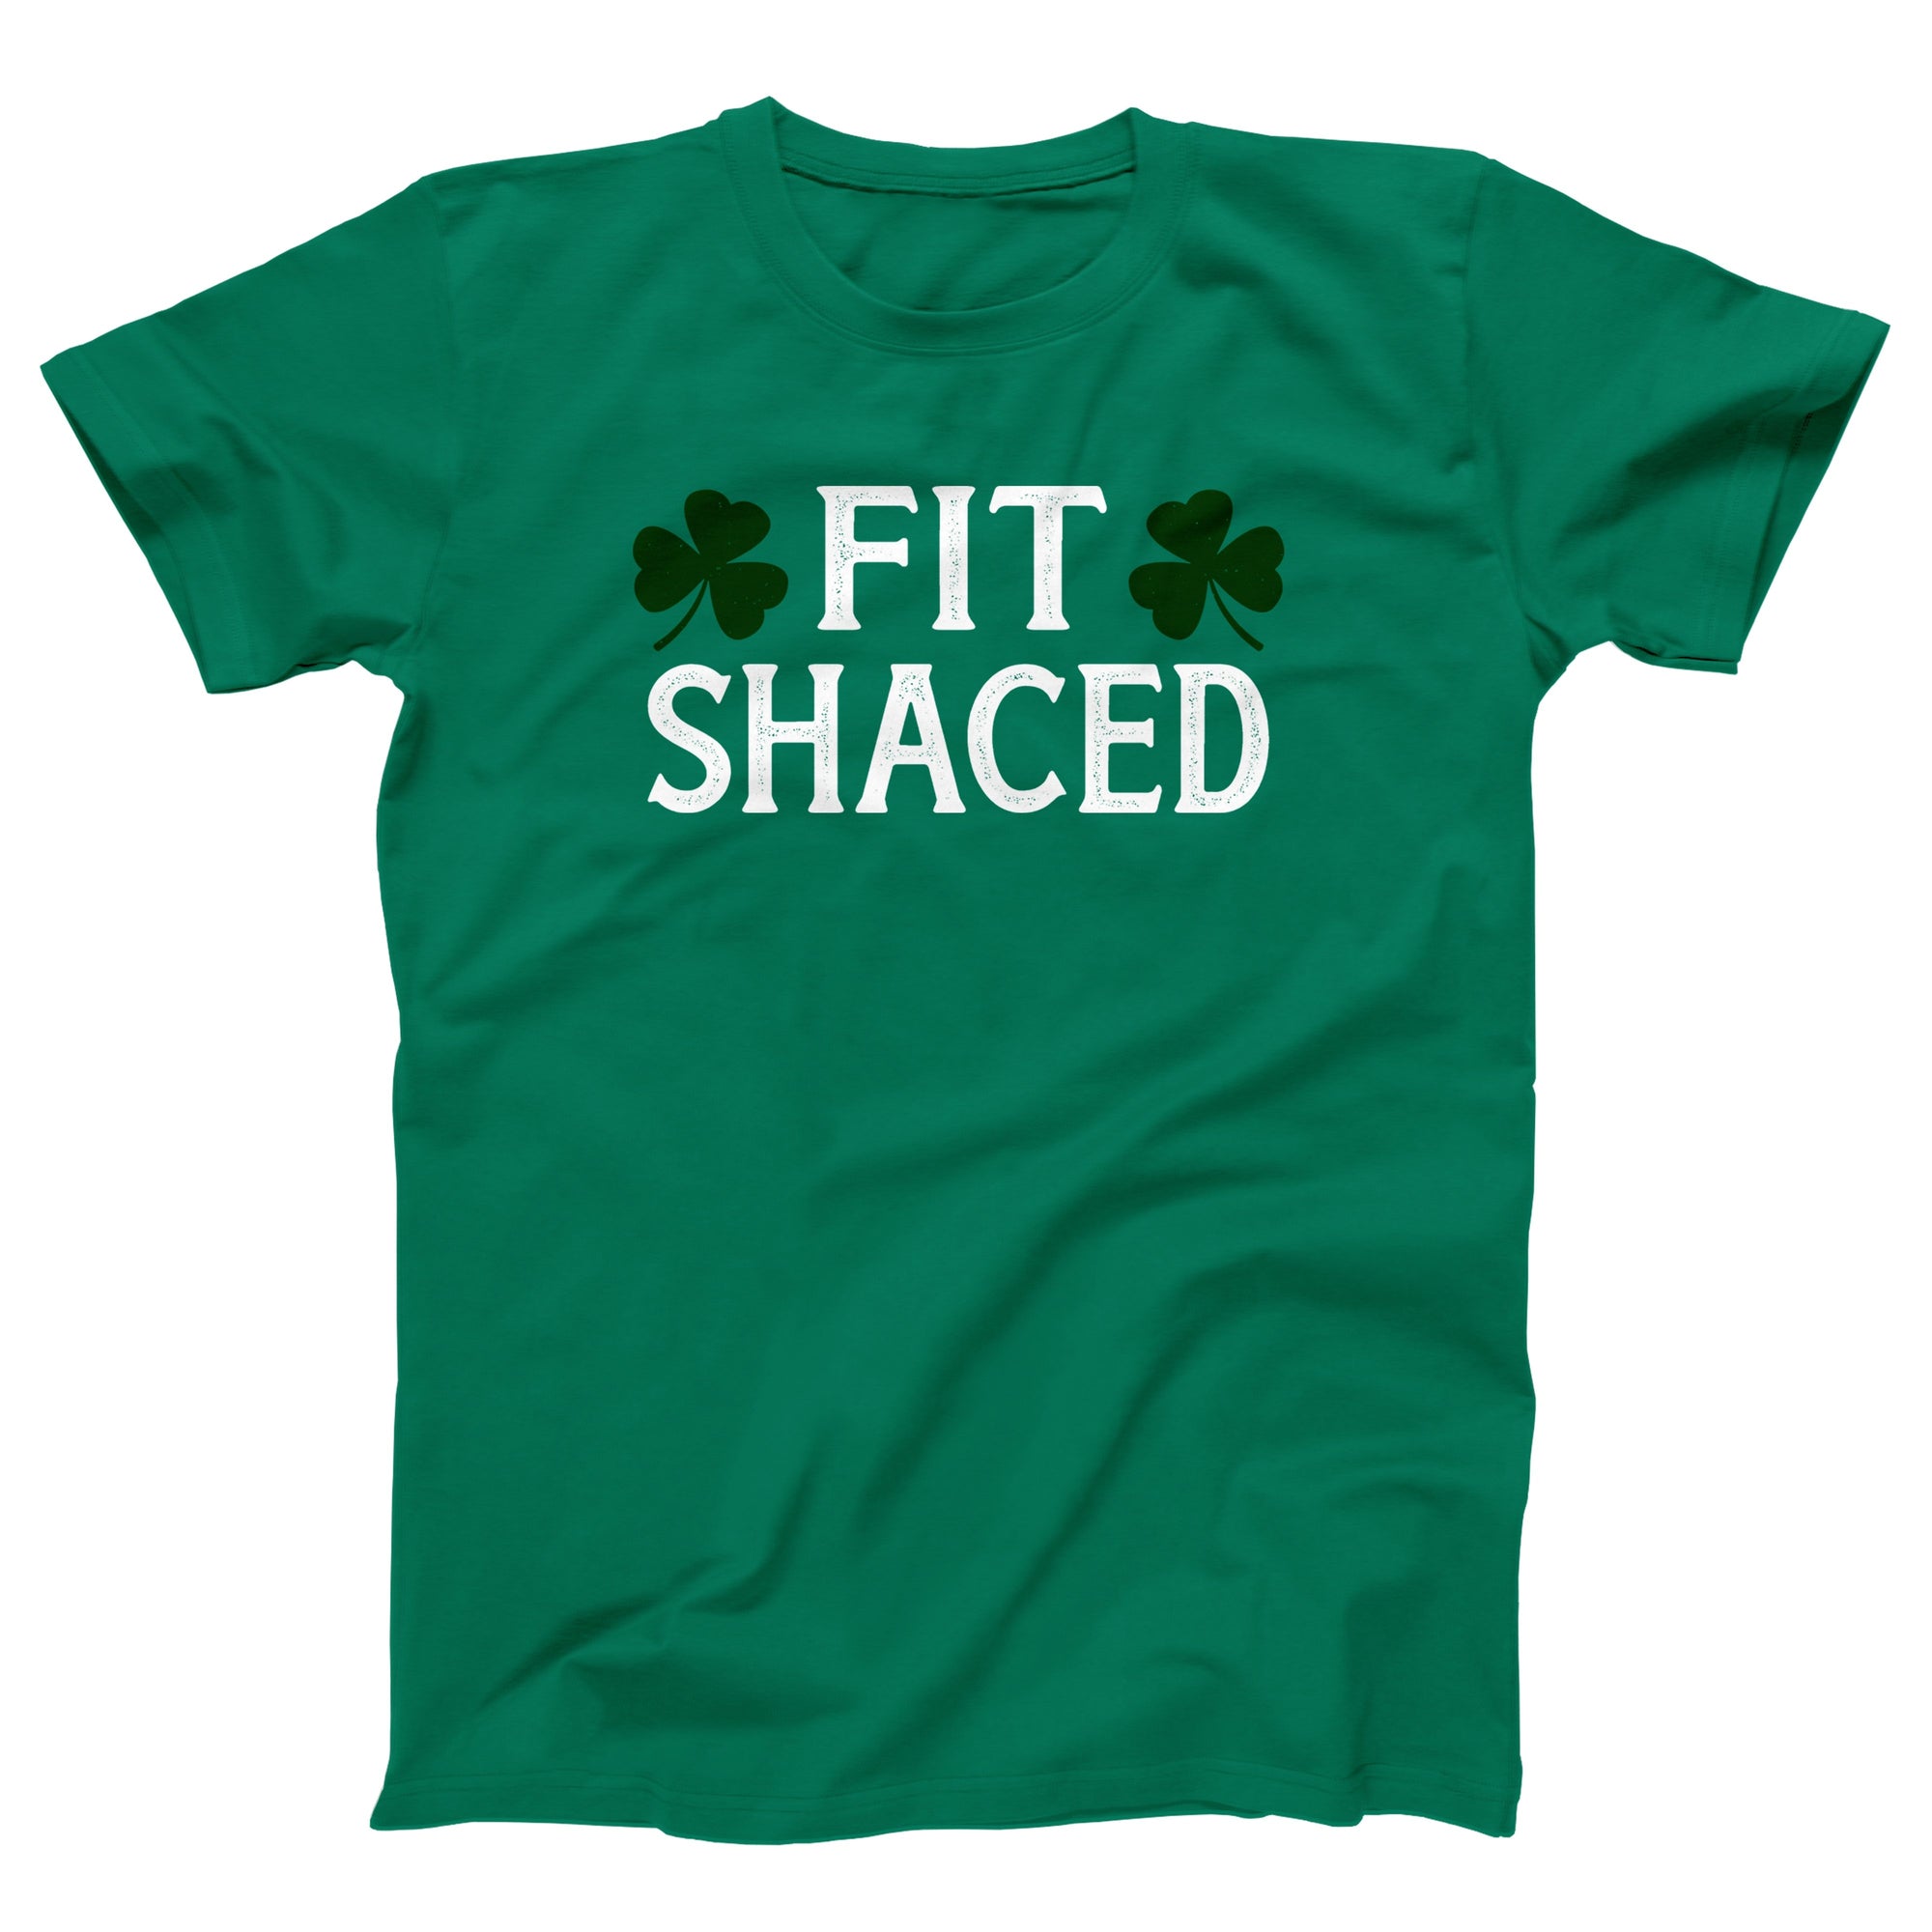 Fit Shaced Adult Unisex T-Shirt - Twisted Gorilla